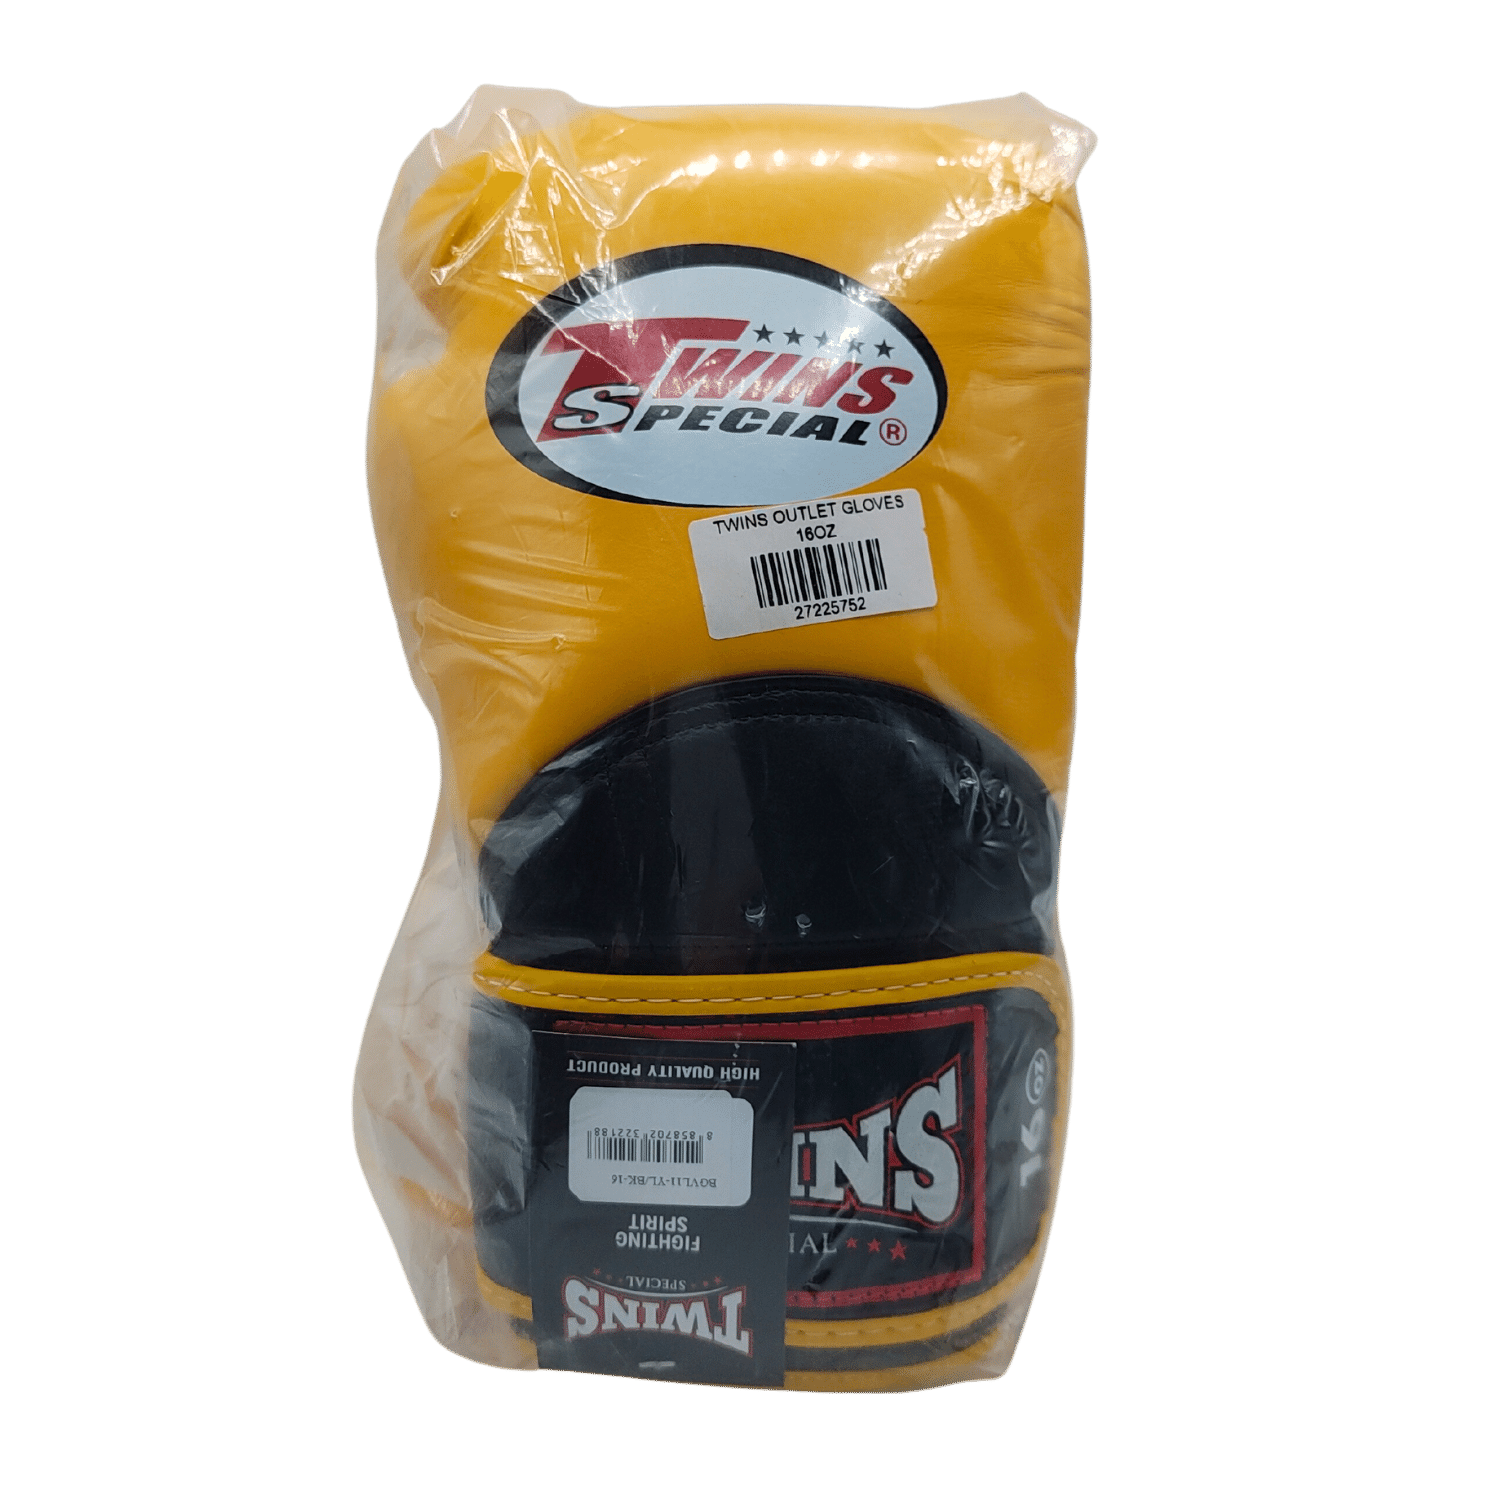 A pair of Twins Duo Colour 16oz Boxing Gloves - Yellow & Black, ideal for training at Al's Gym.